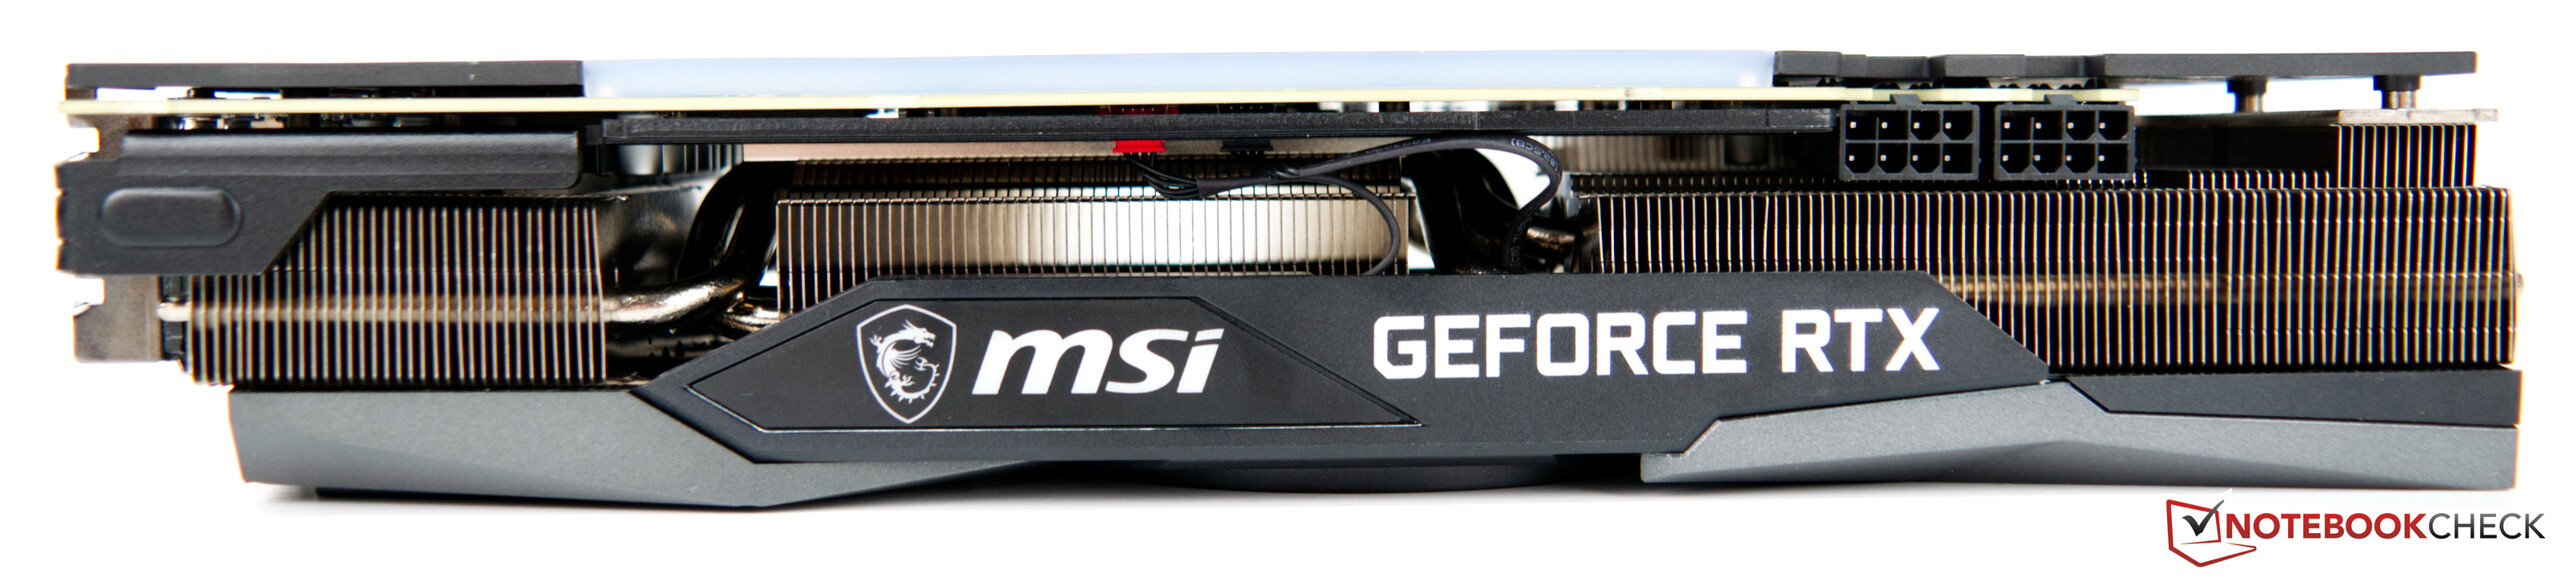 PC/タブレット PCパーツ MSI GeForce RTX 3070 Gaming X Trio desktop graphics card in review 